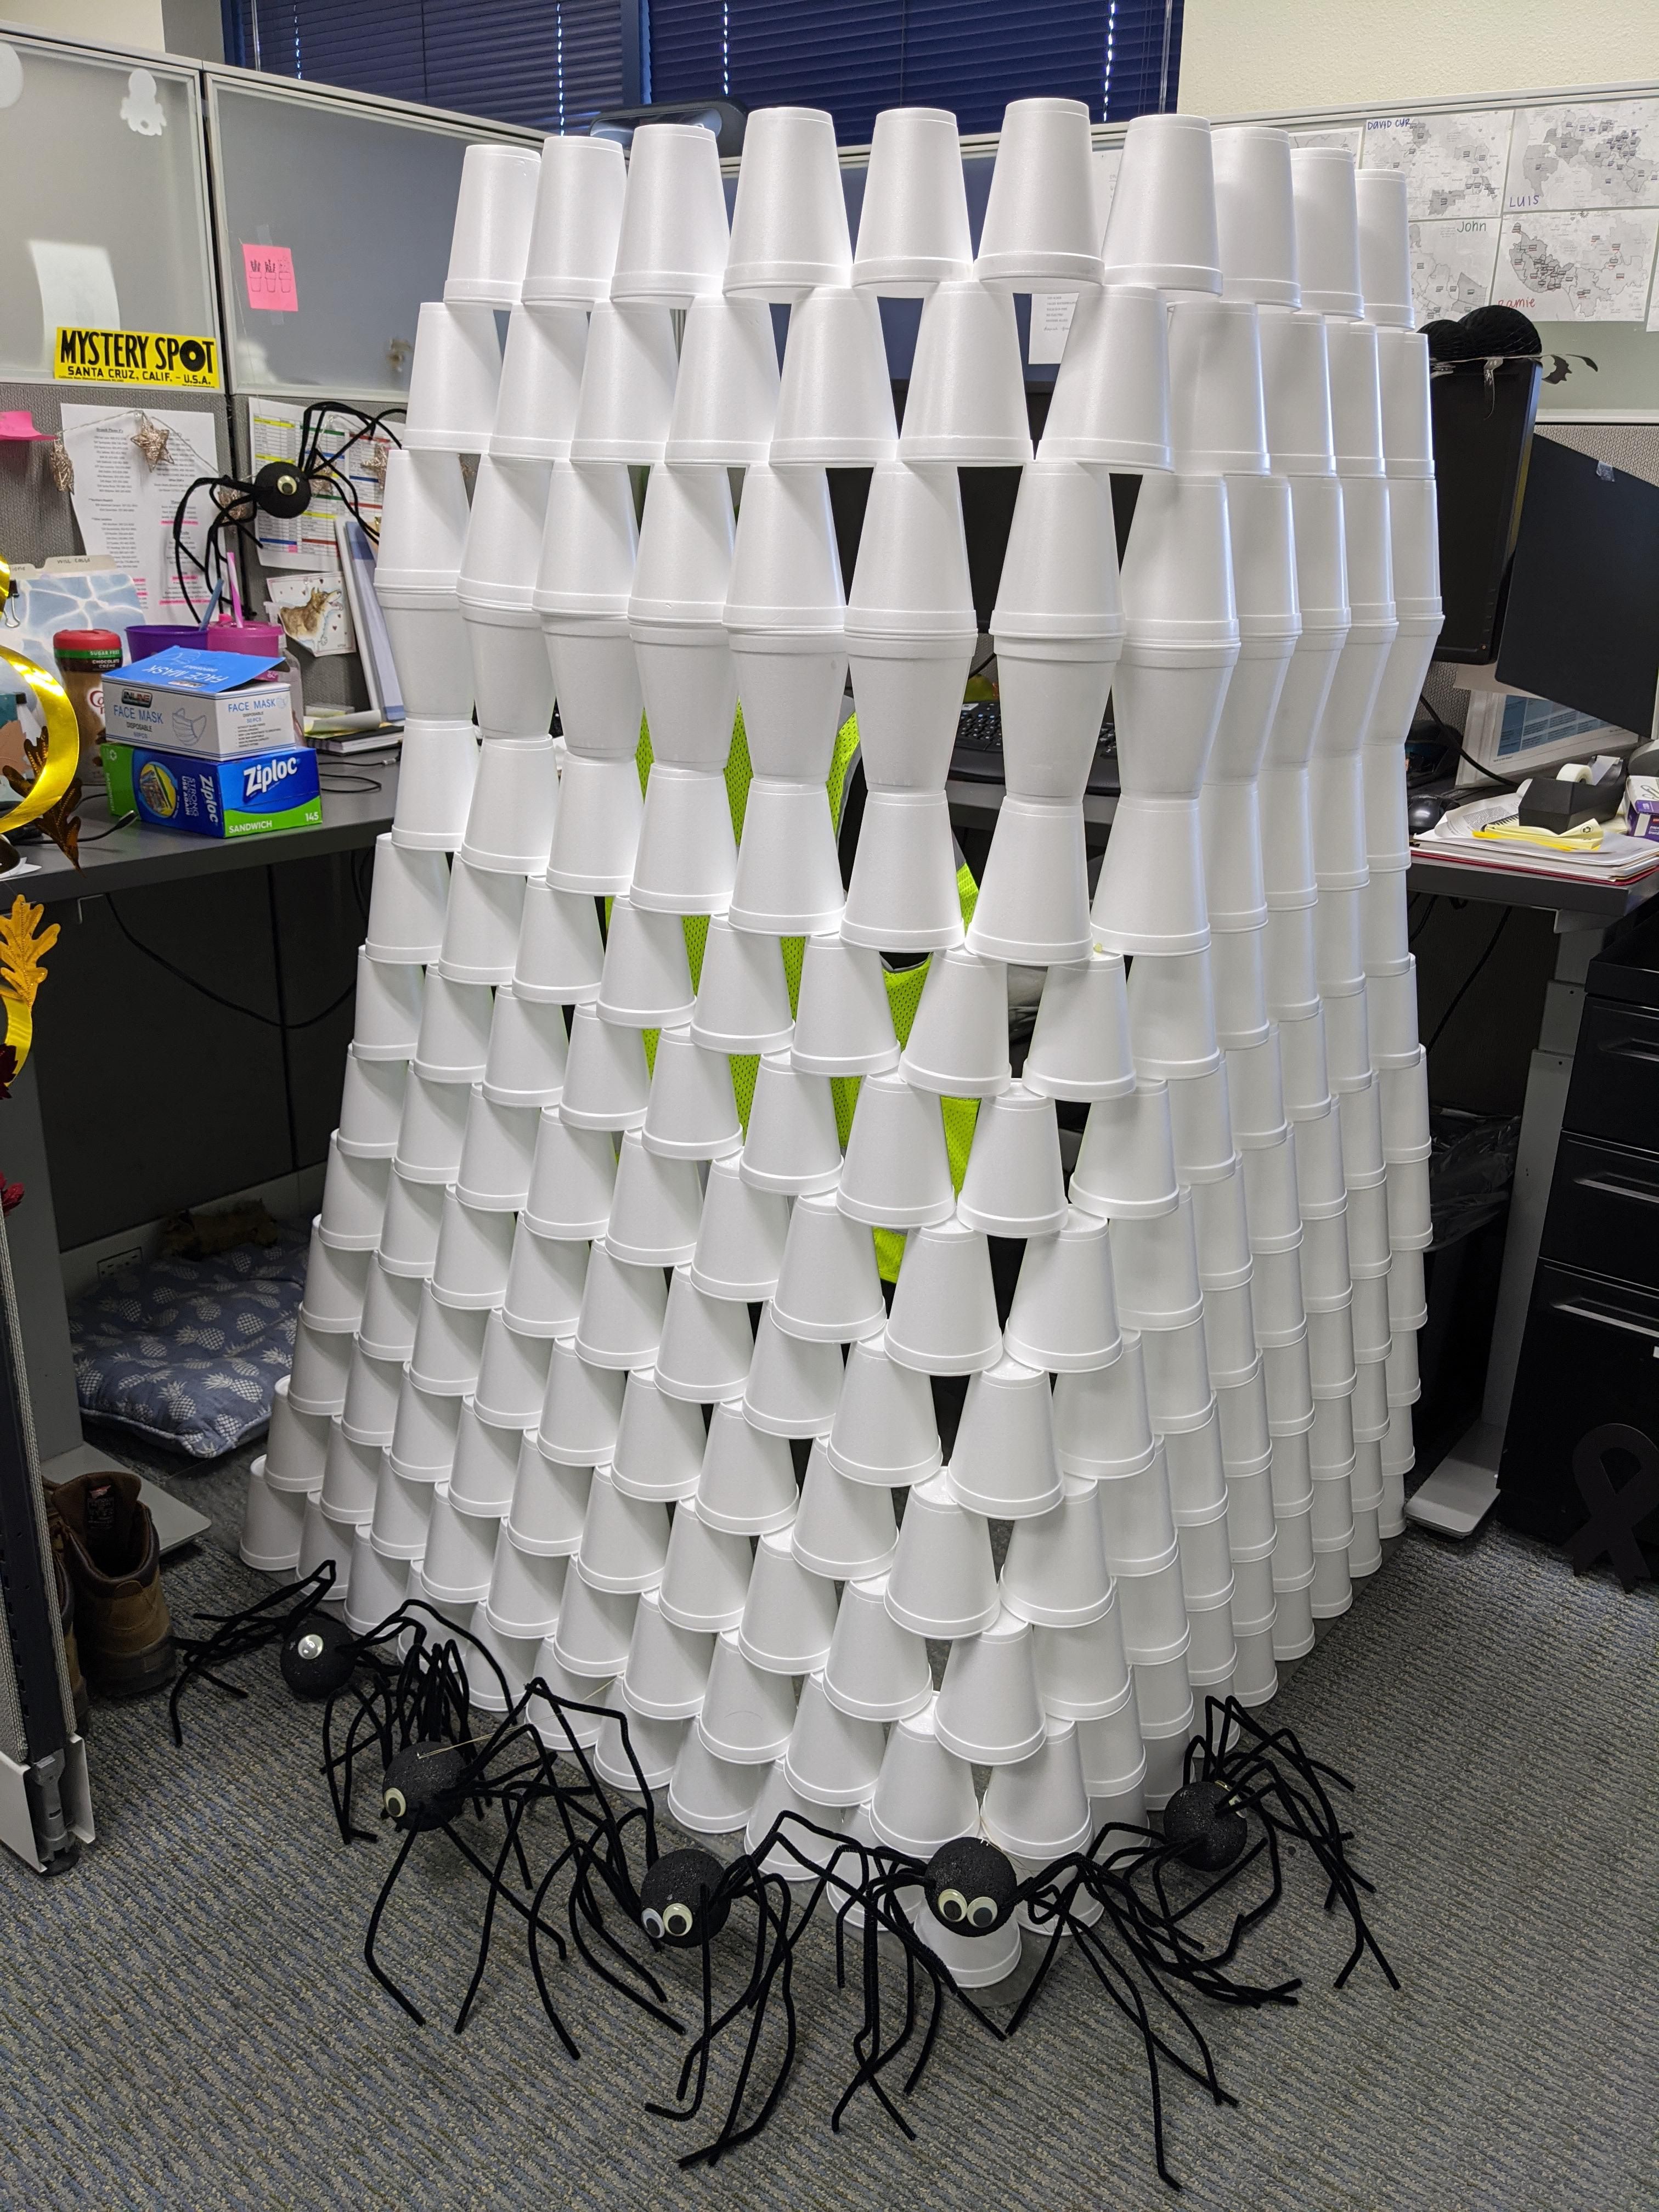 Whenever a coworker calls in sick, it's tradition to prank their cube.